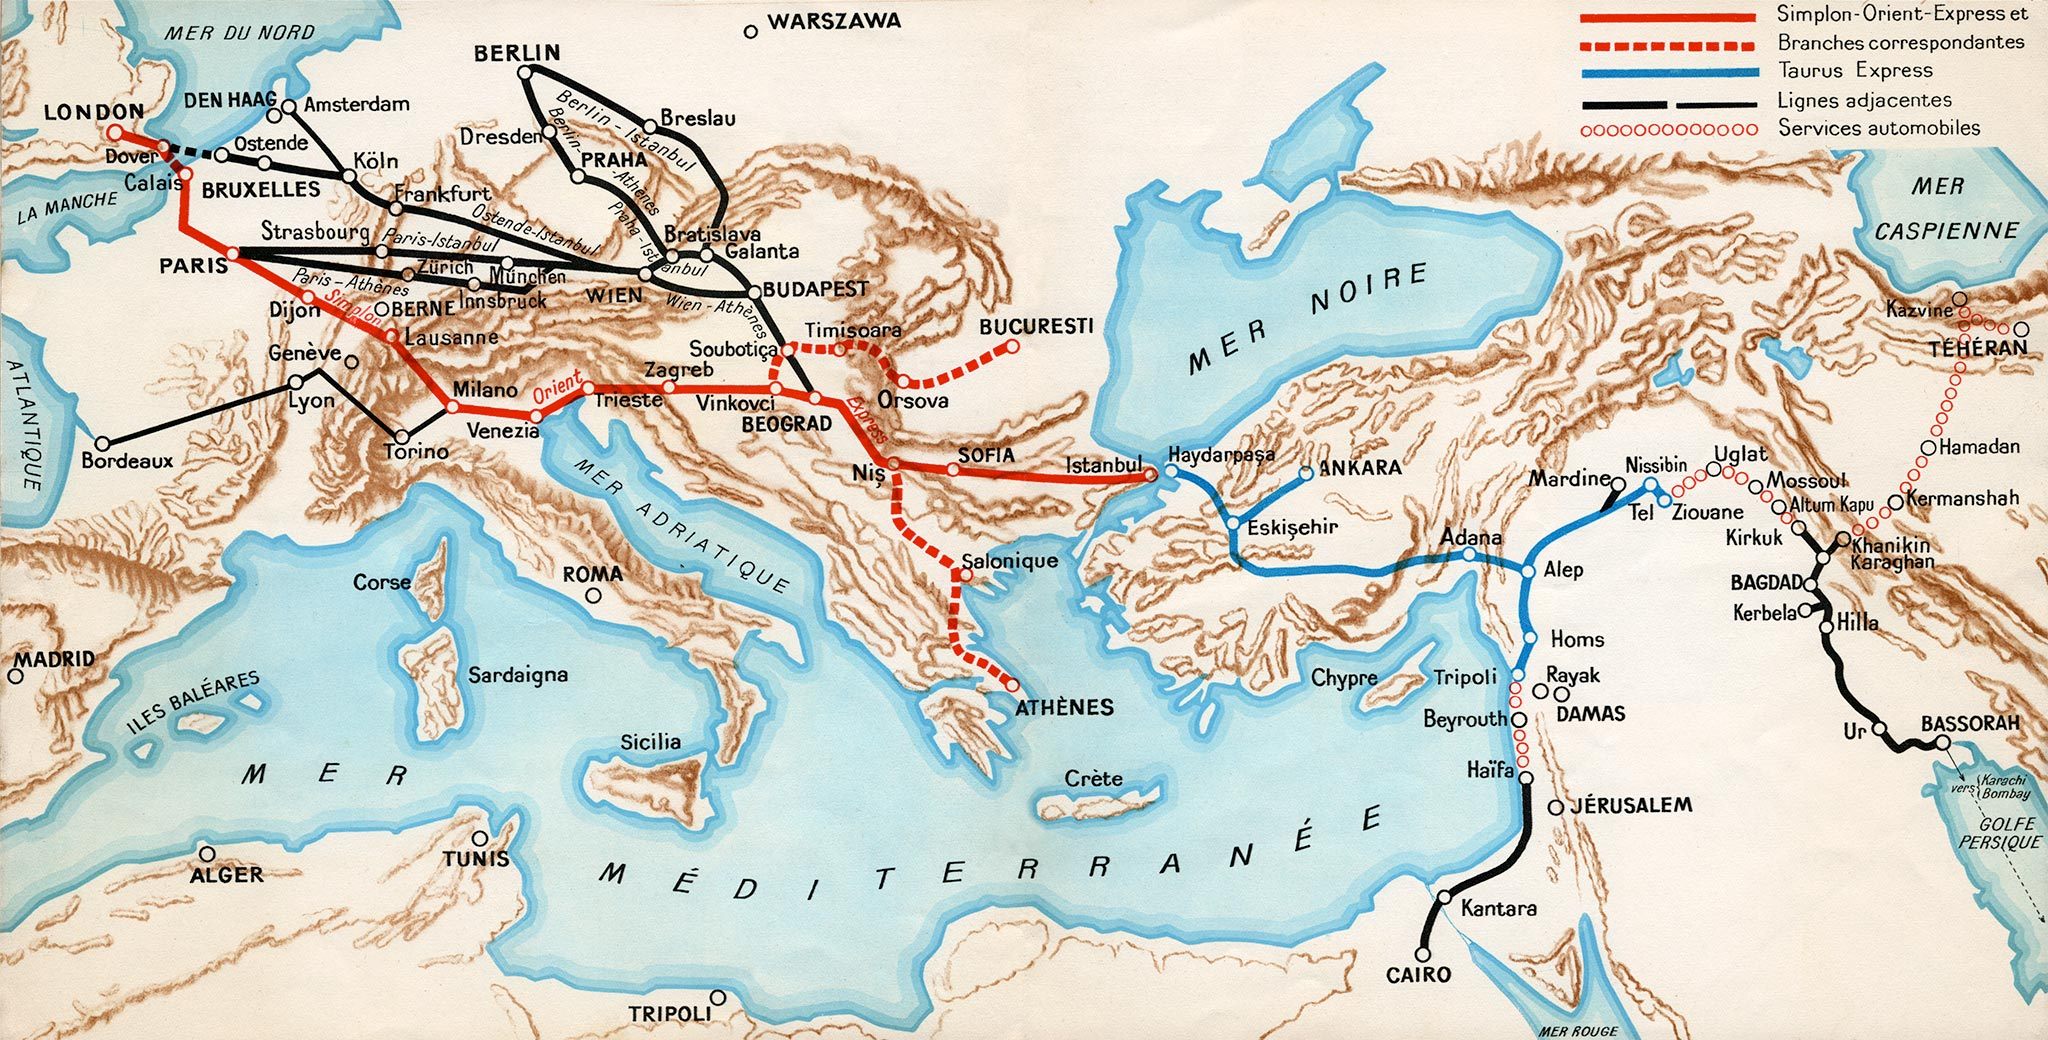 An Illustrated History of the Orient Express - Atlas Obscura